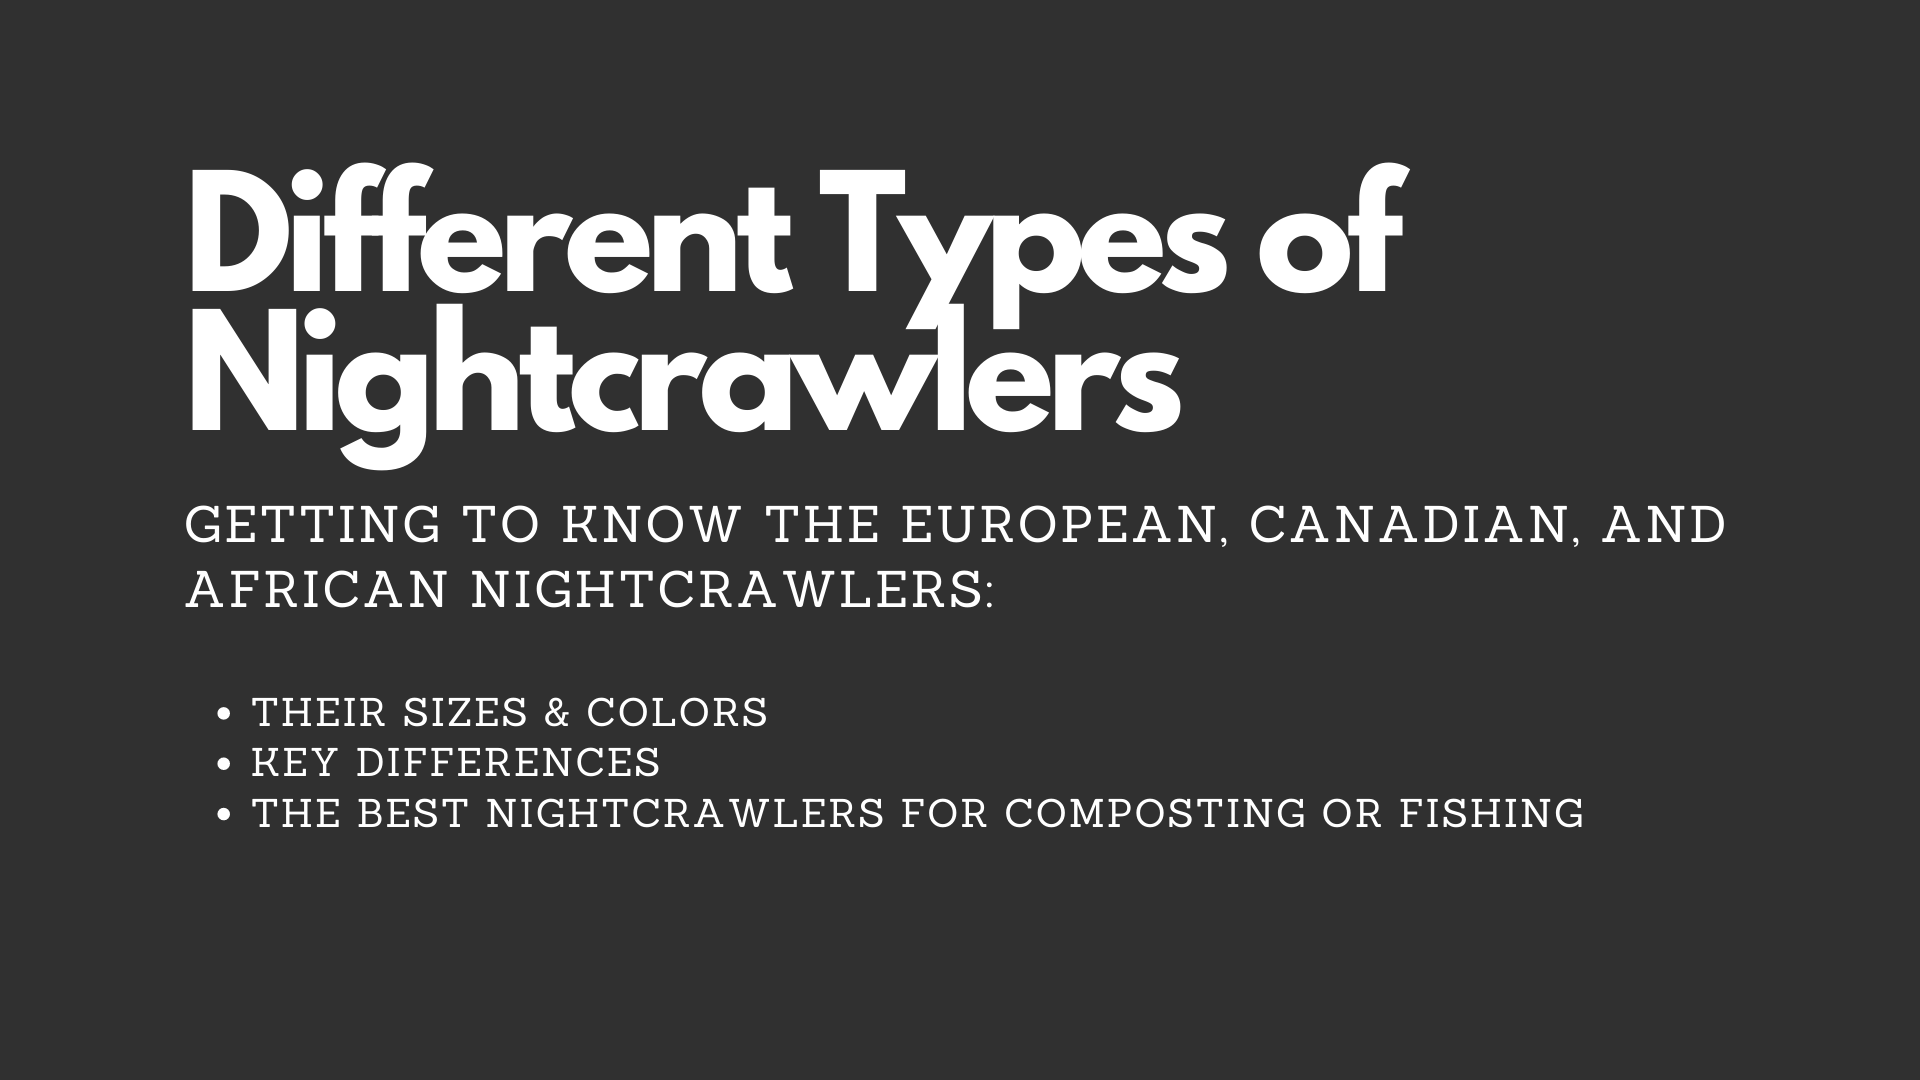 Canadian, African, and European Nightcrawlers: Get to Know the Different  Types of Nightcrawlers